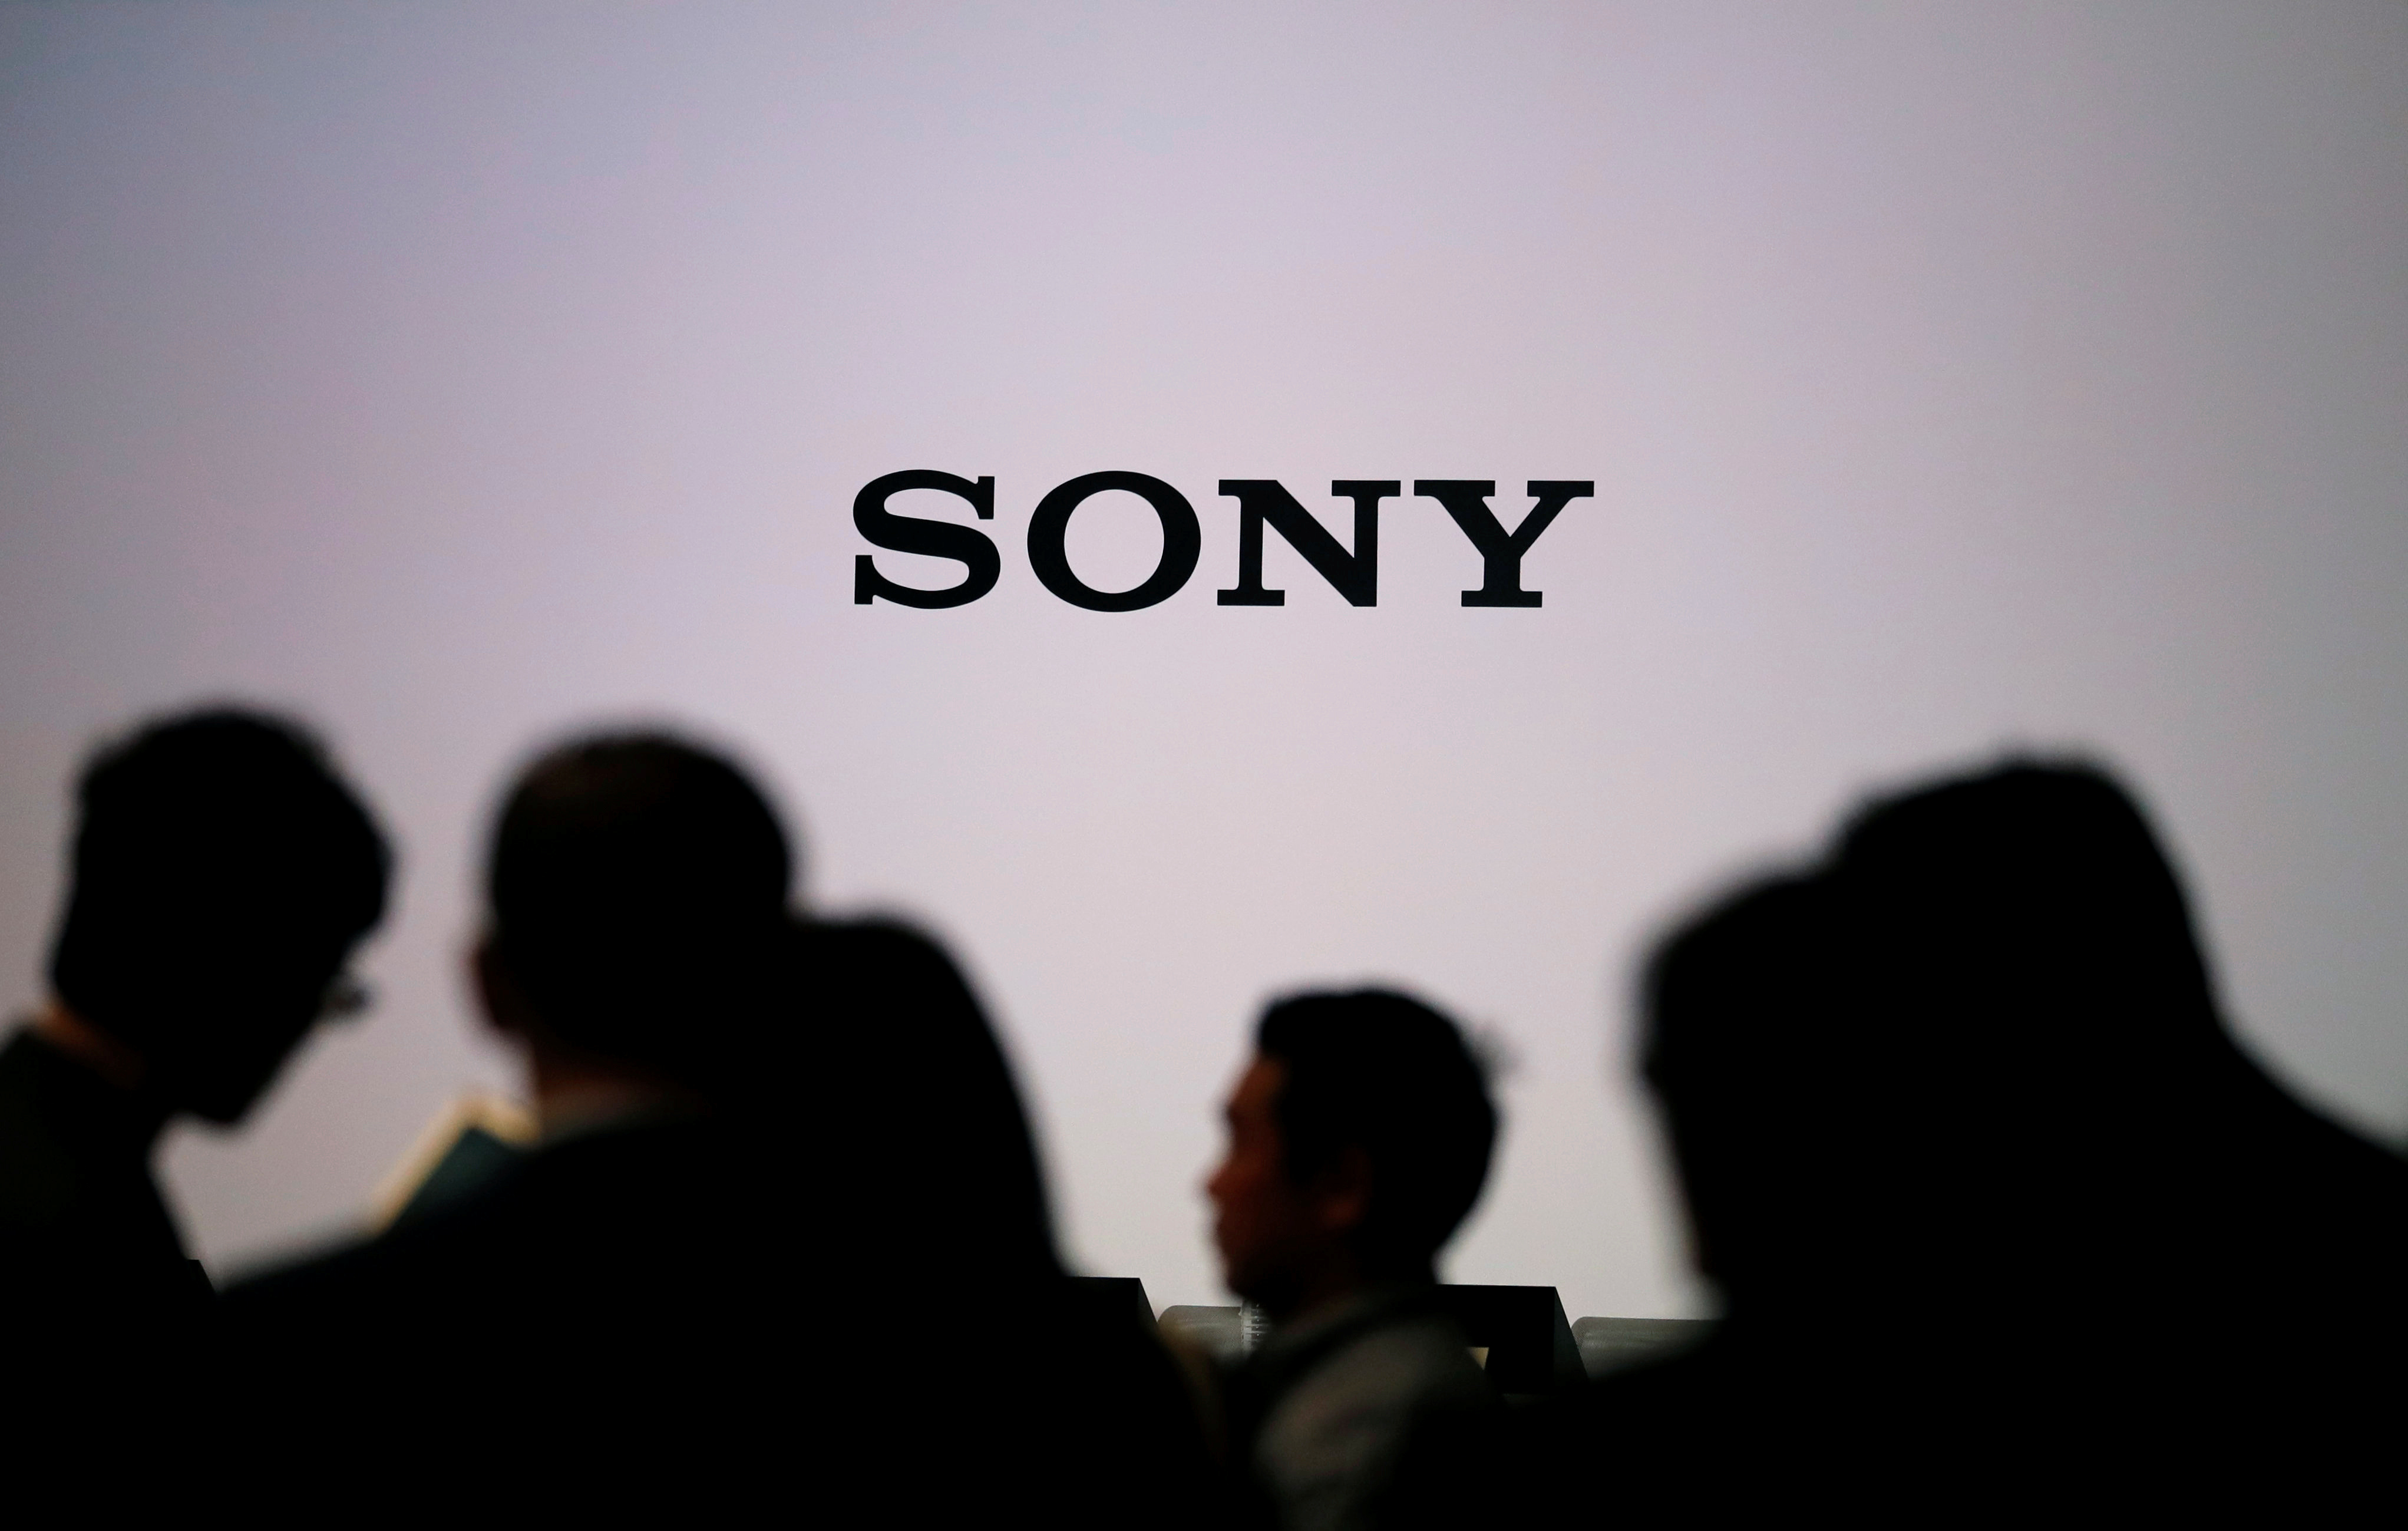 Journalists wait for Sony Corp's new President and Chief Executive Officer Kenichiro Yoshida's news conference on the company's business plan at Sony's headquarters in Tokyo